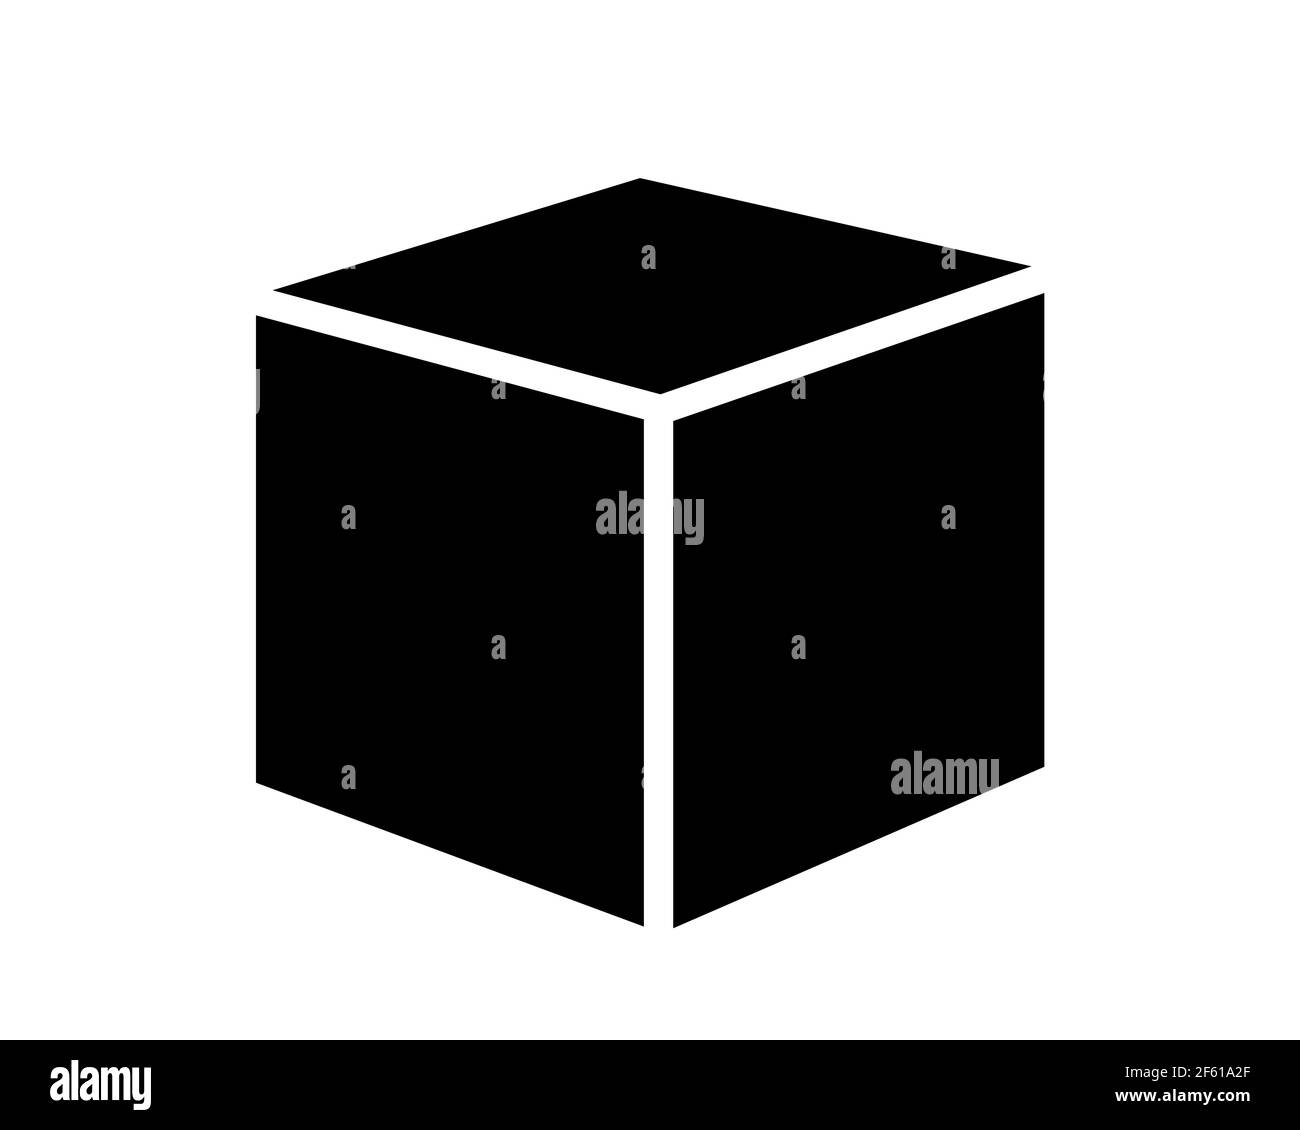 Box and cube as dimensional object on white background. Vector illustration isolated on white. Stock Photo